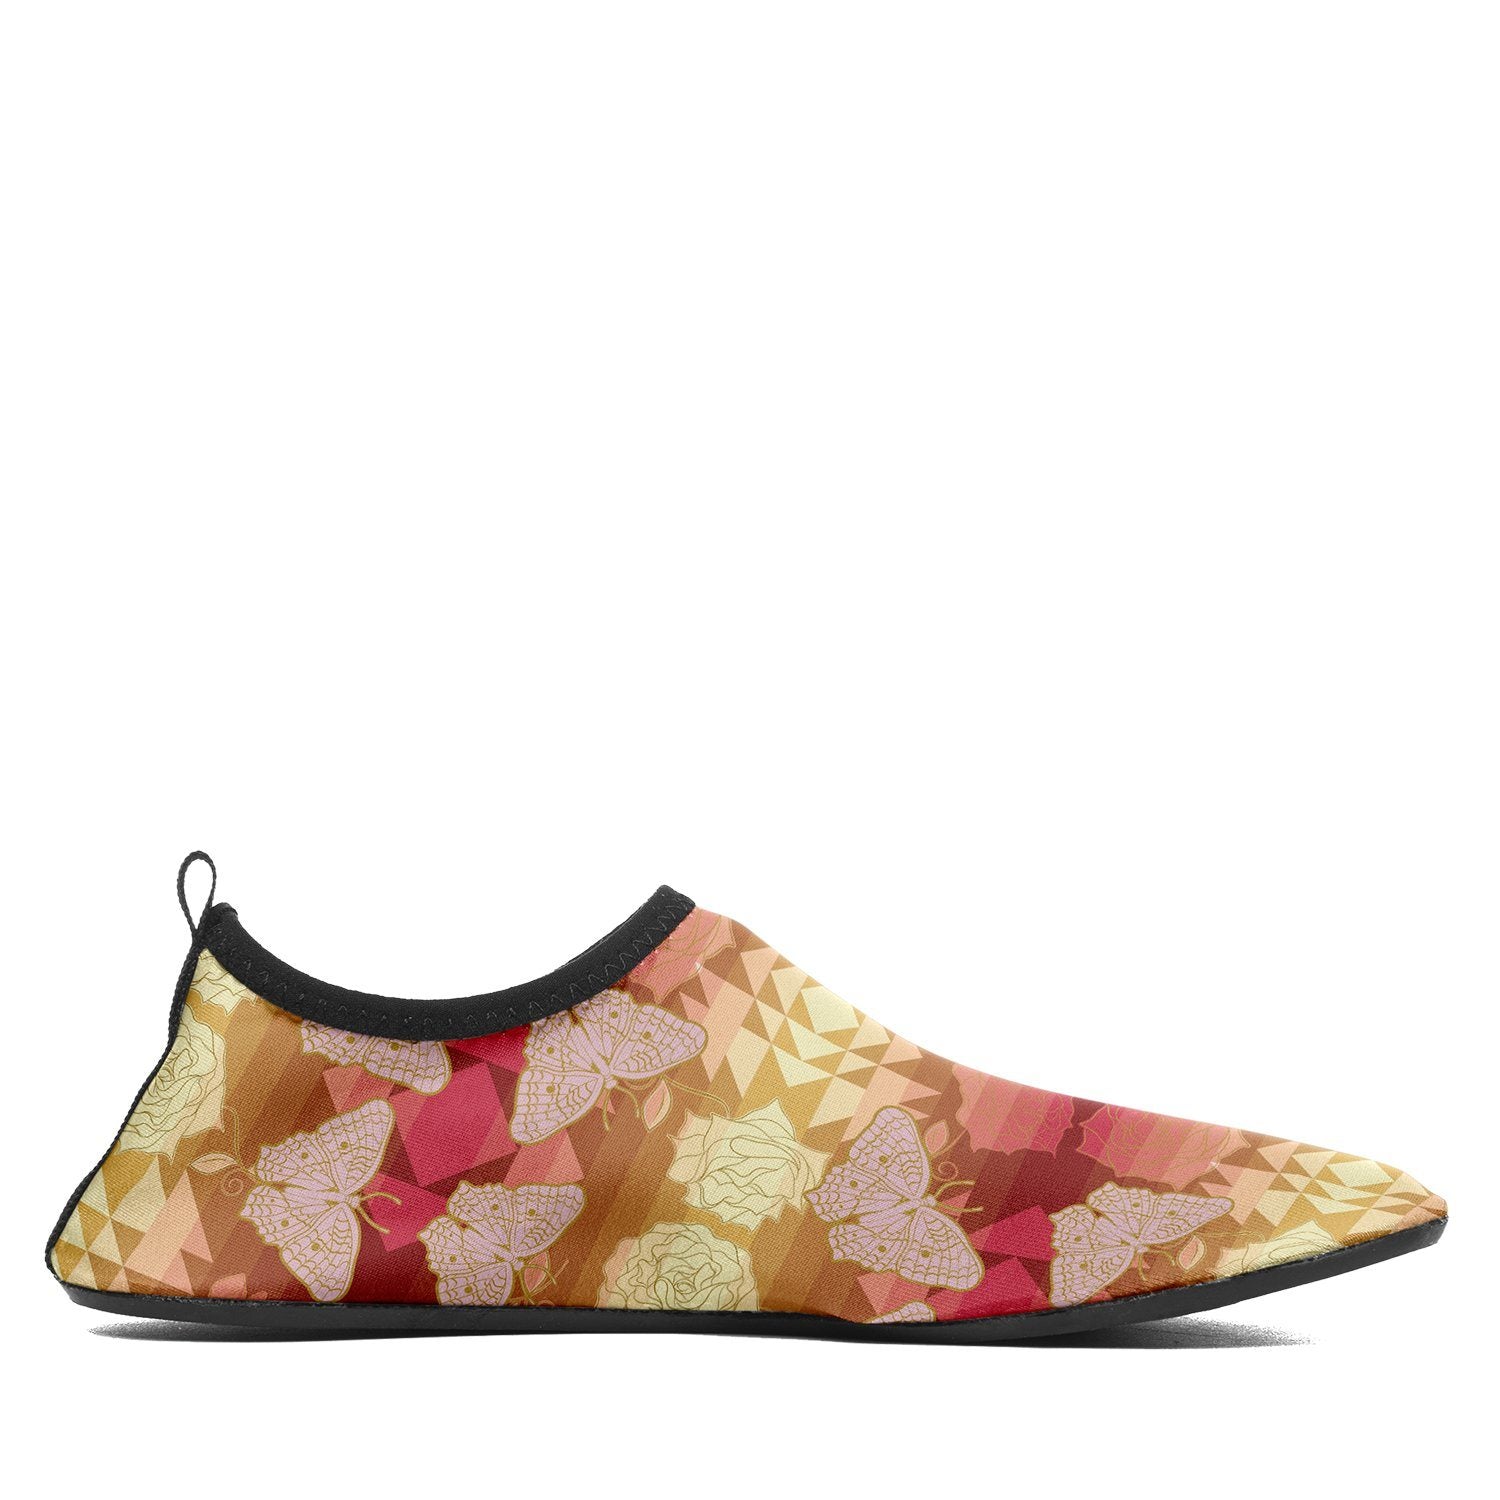 Butterfly and Roses on Geometric Sockamoccs Slip On Shoes Herman 